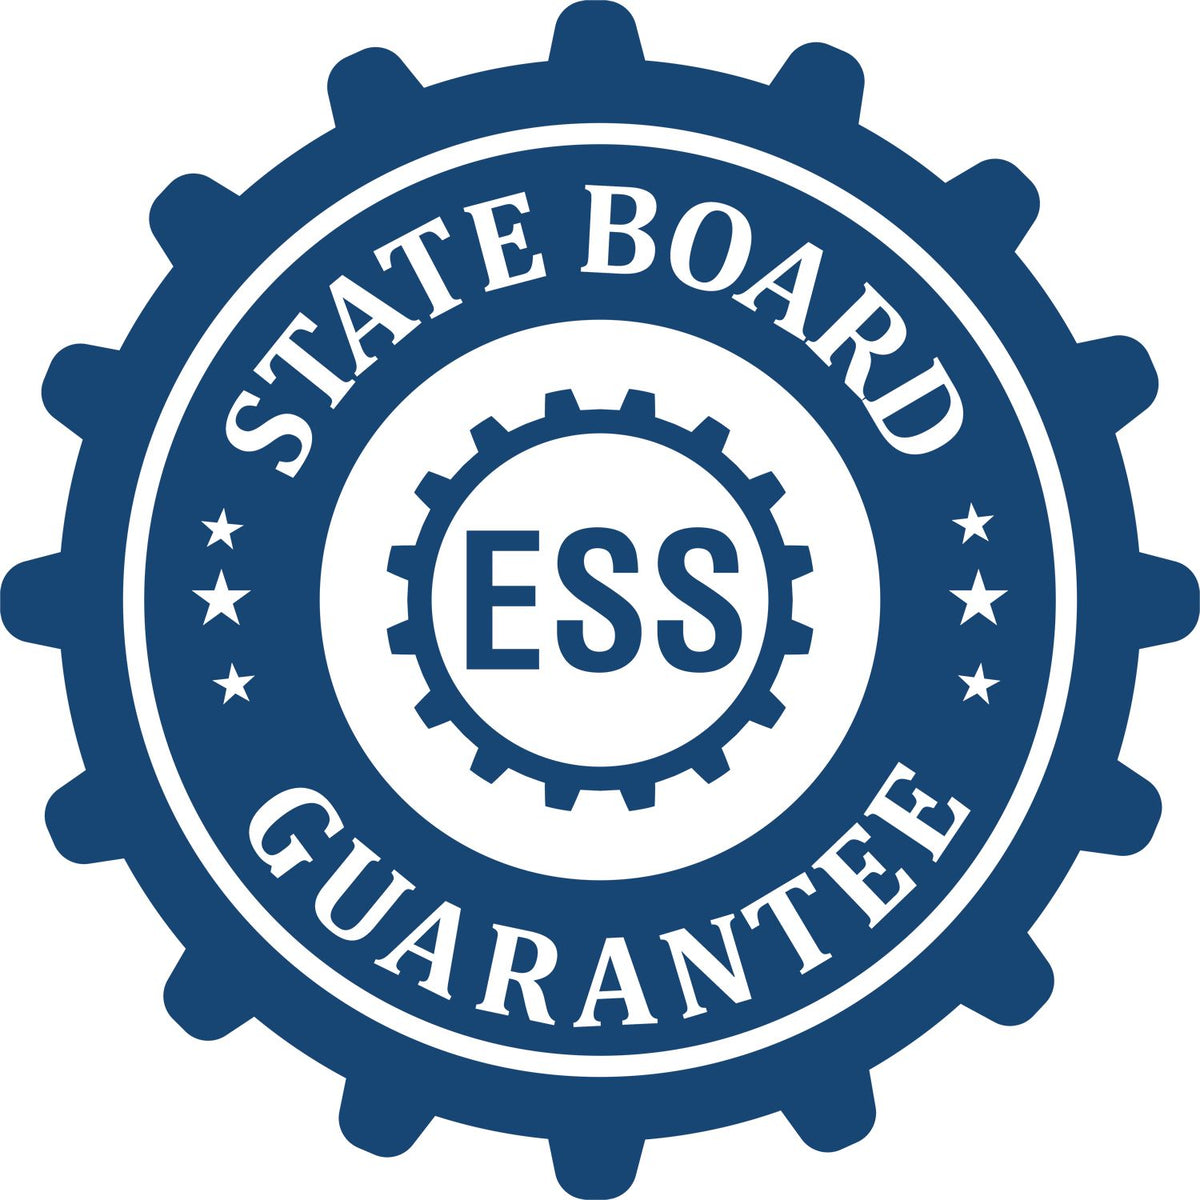 An emblem in a gear shape illustrating a state board guarantee for the Premium MaxLight Pre-Inked Alabama Engineering Stamp product.